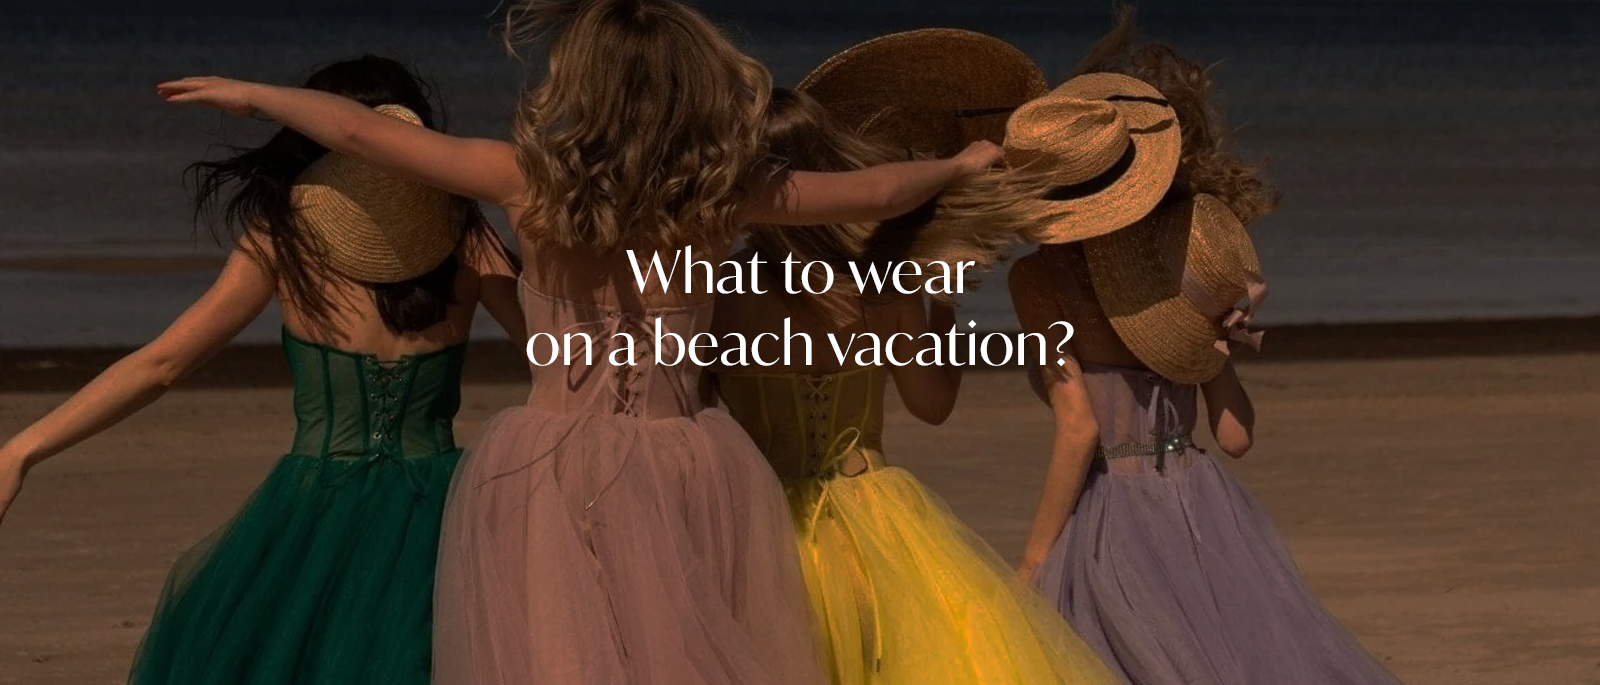 What to wear on a beach vacation